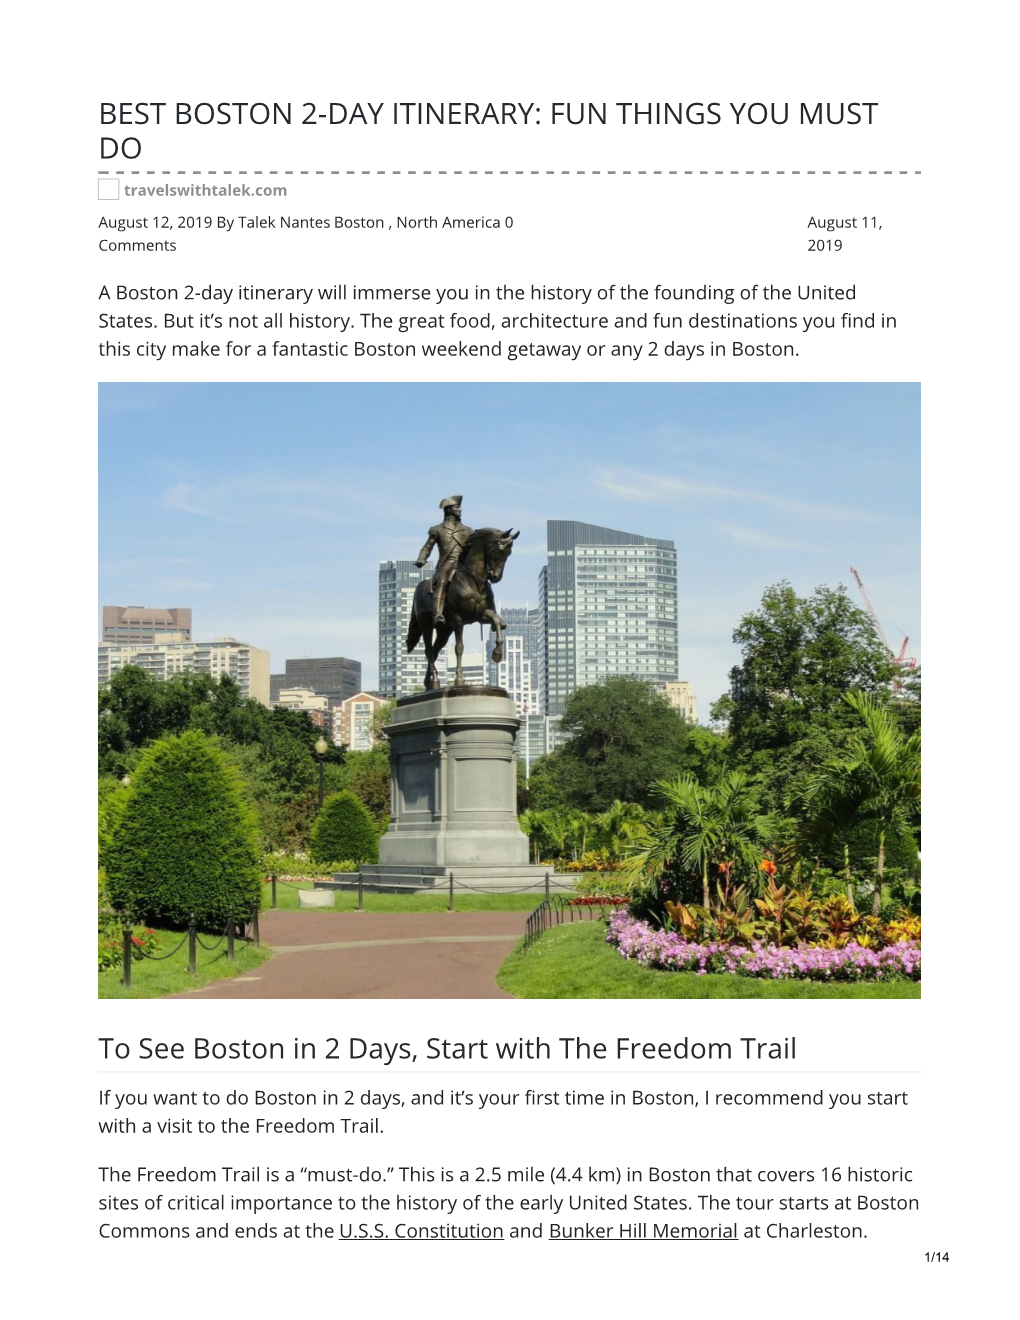 Best Boston 2-Day Itinerary: Fun Things You Must Do